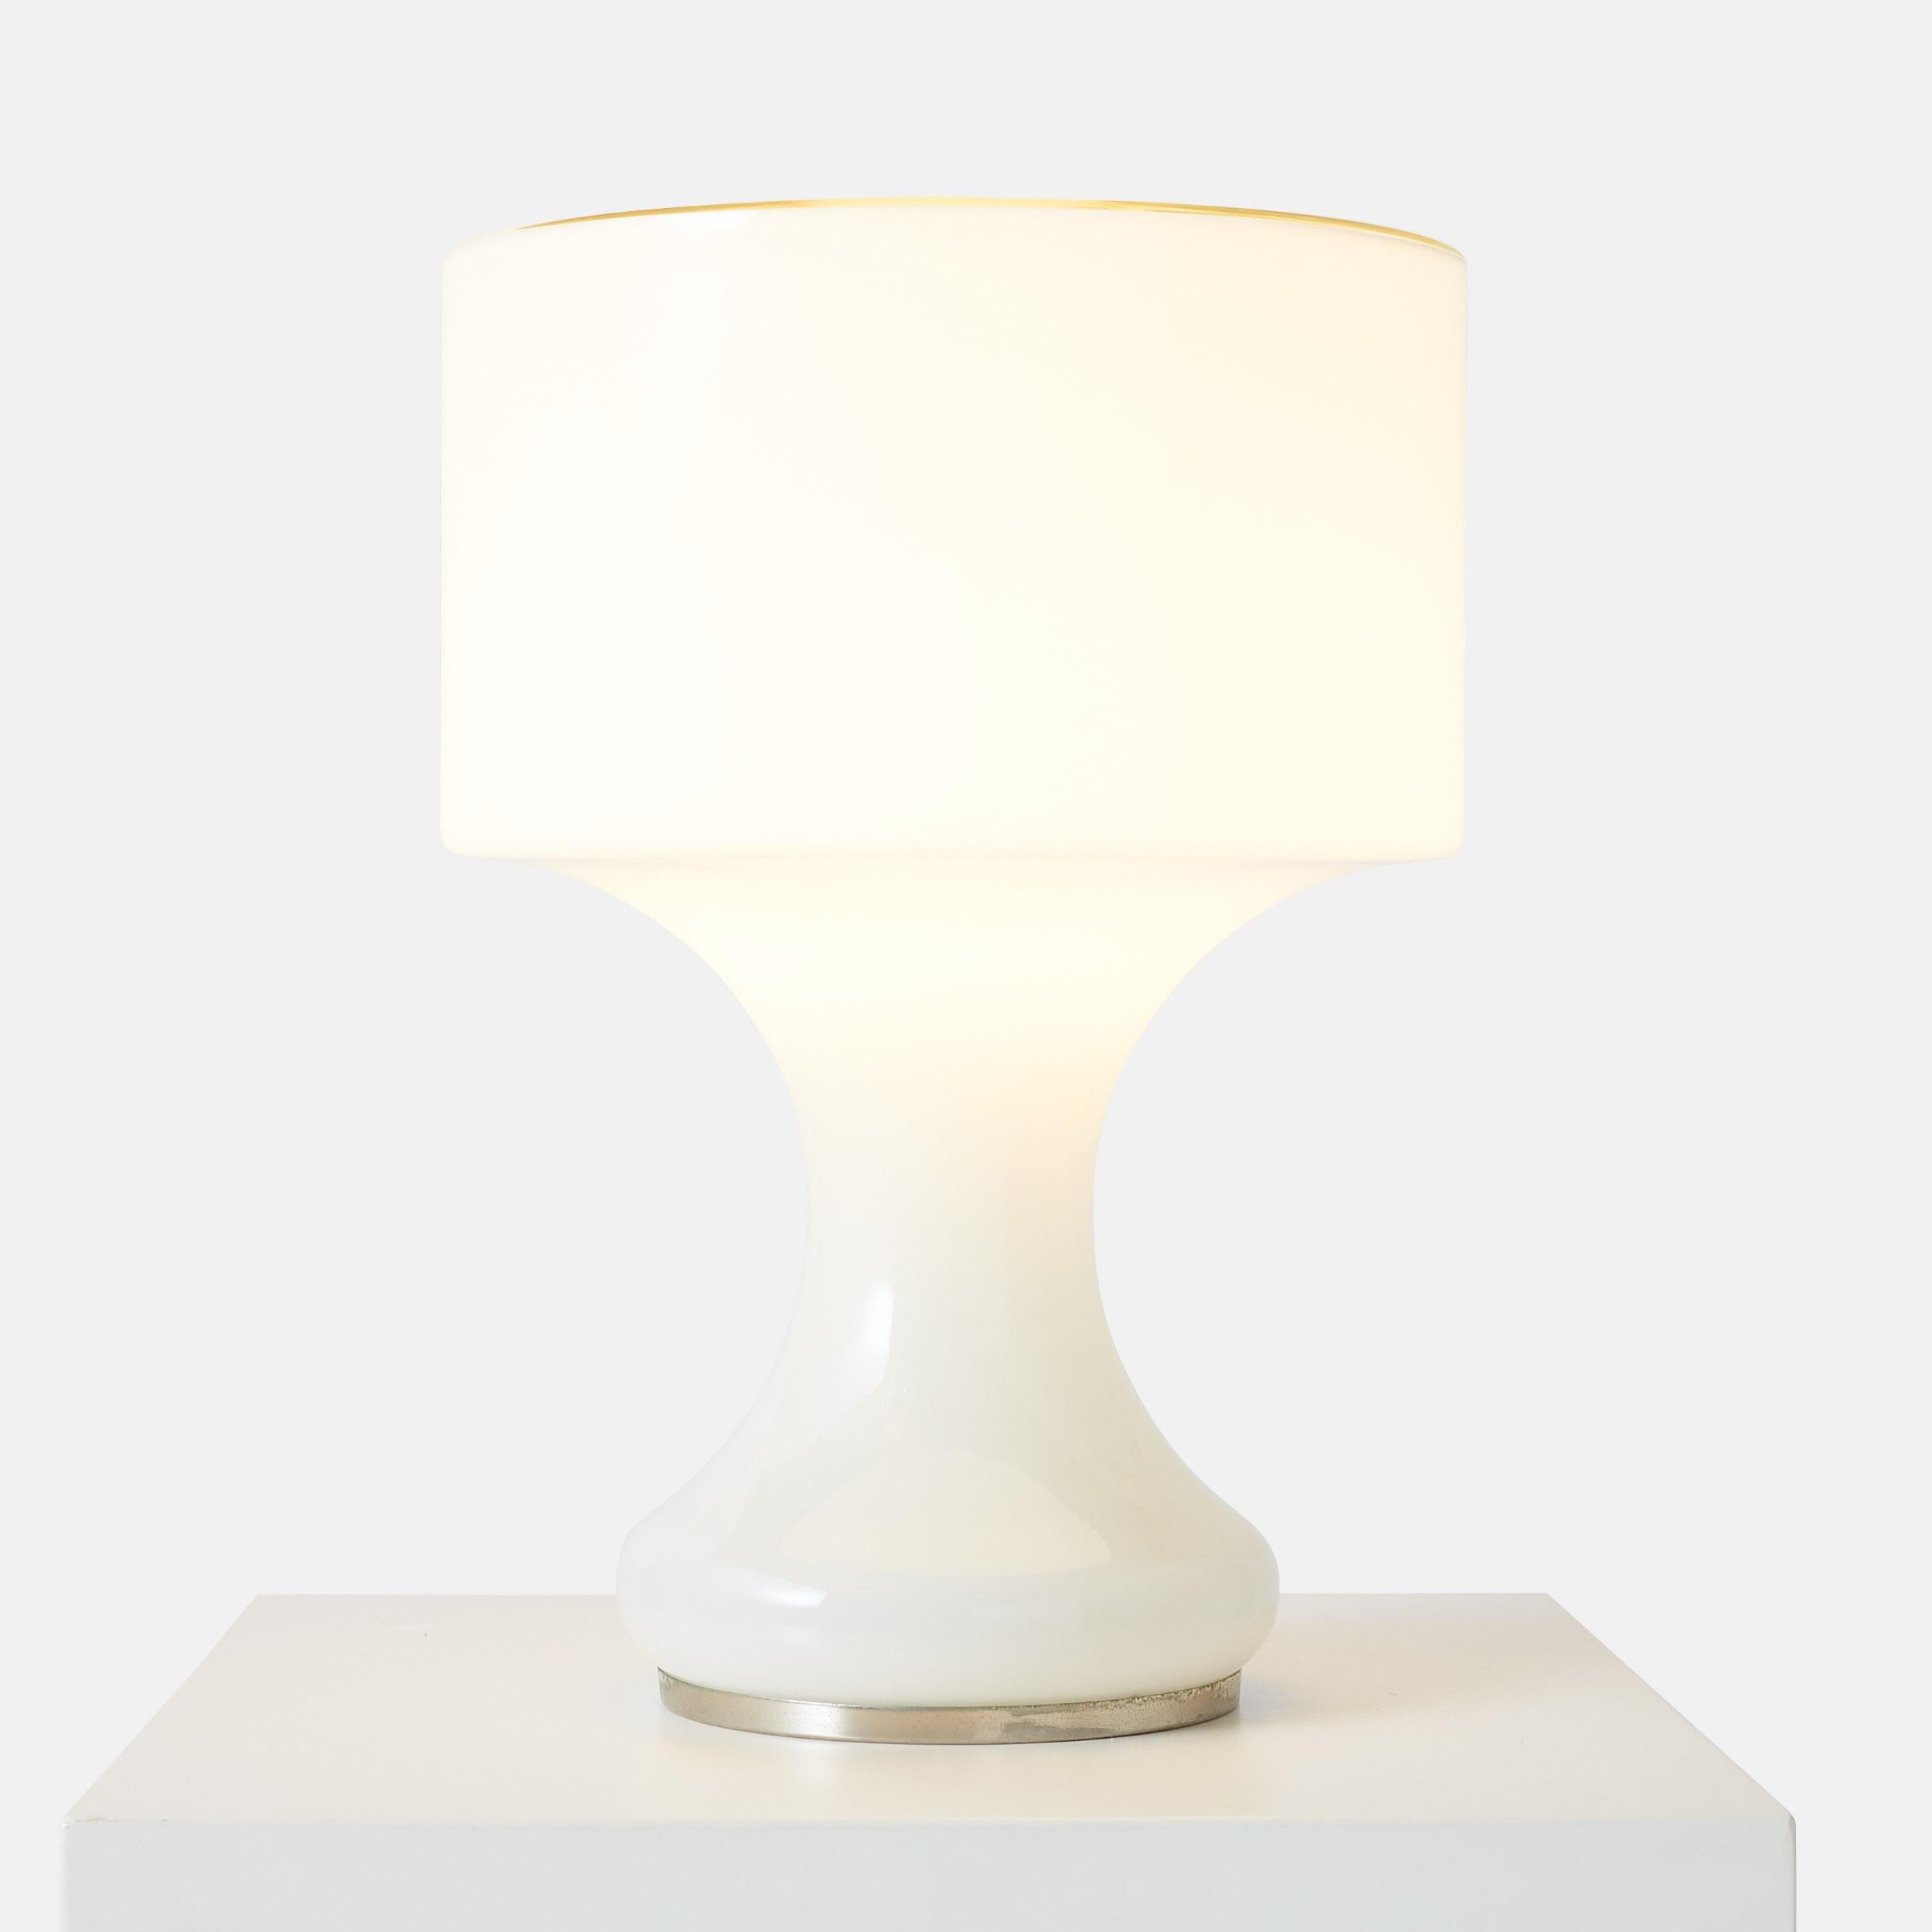 An opaque white hand blown glass Sebenica table lamp by Enrico Capuzzo for Vistosi.
No chips or cracks in the glass.
Original wiring.